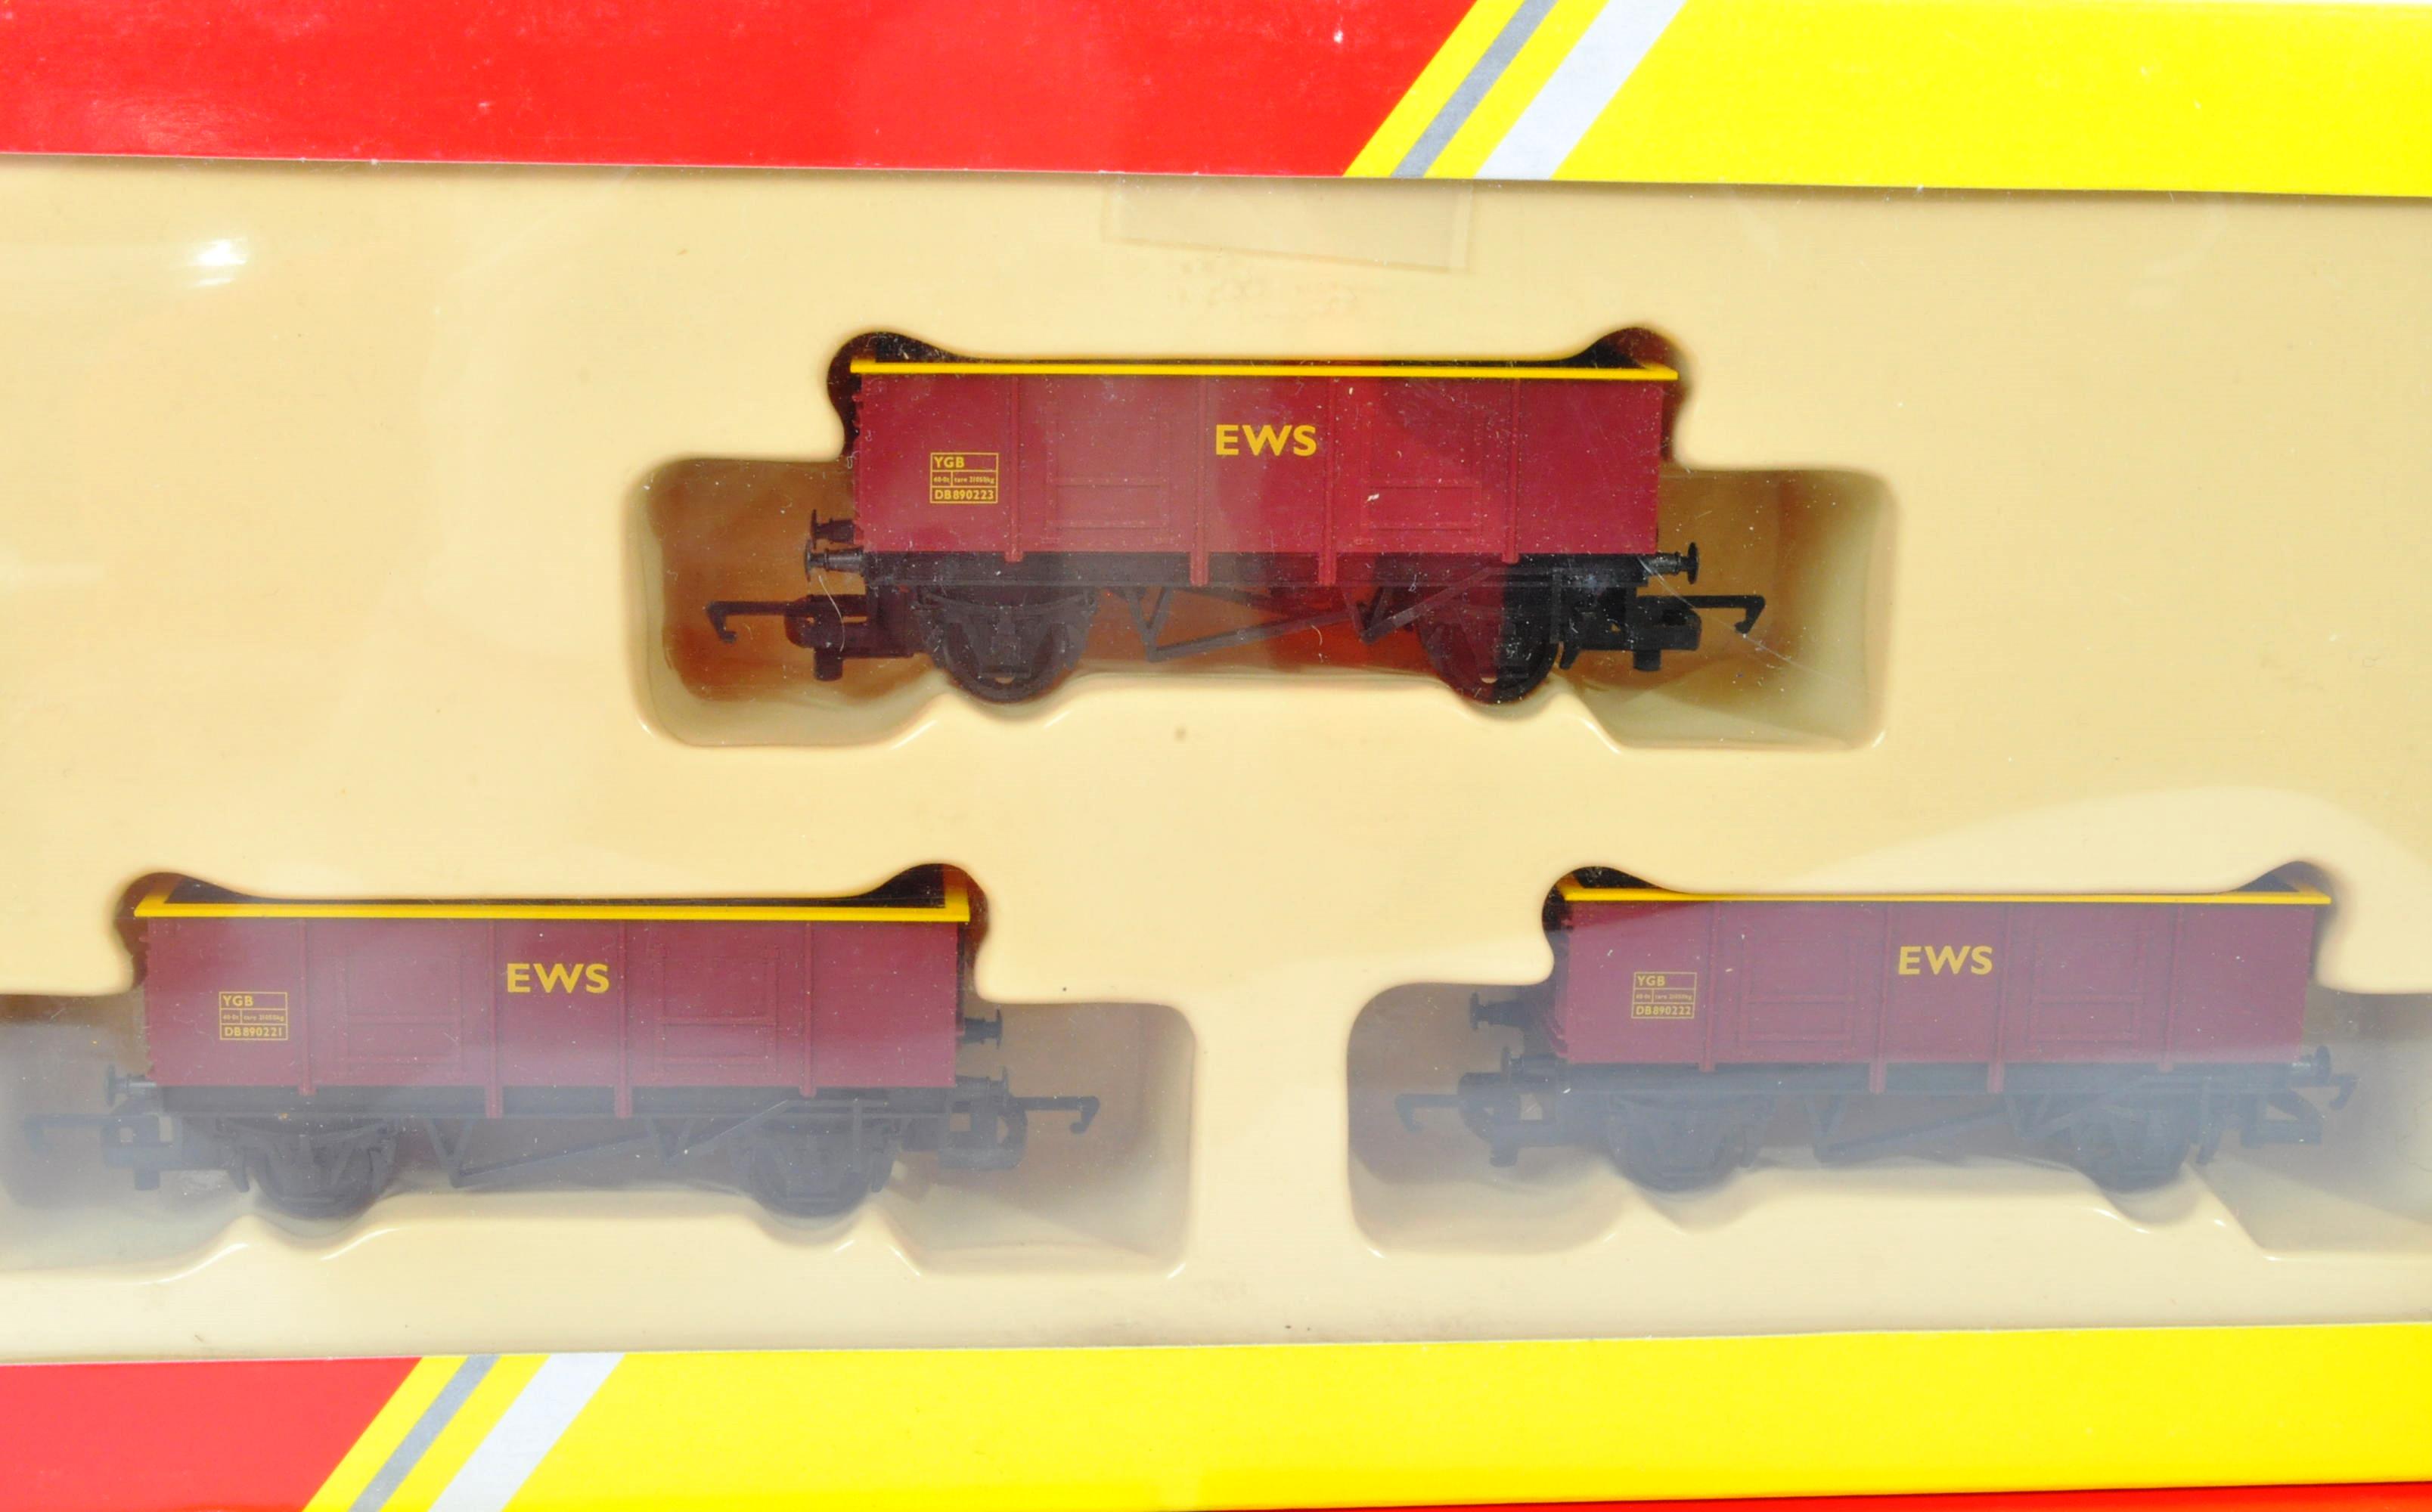 COLLECTION OF HORNBY 00 GAUGE MODEL RAILWAY ROLLING STOCK SETS - Image 3 of 5